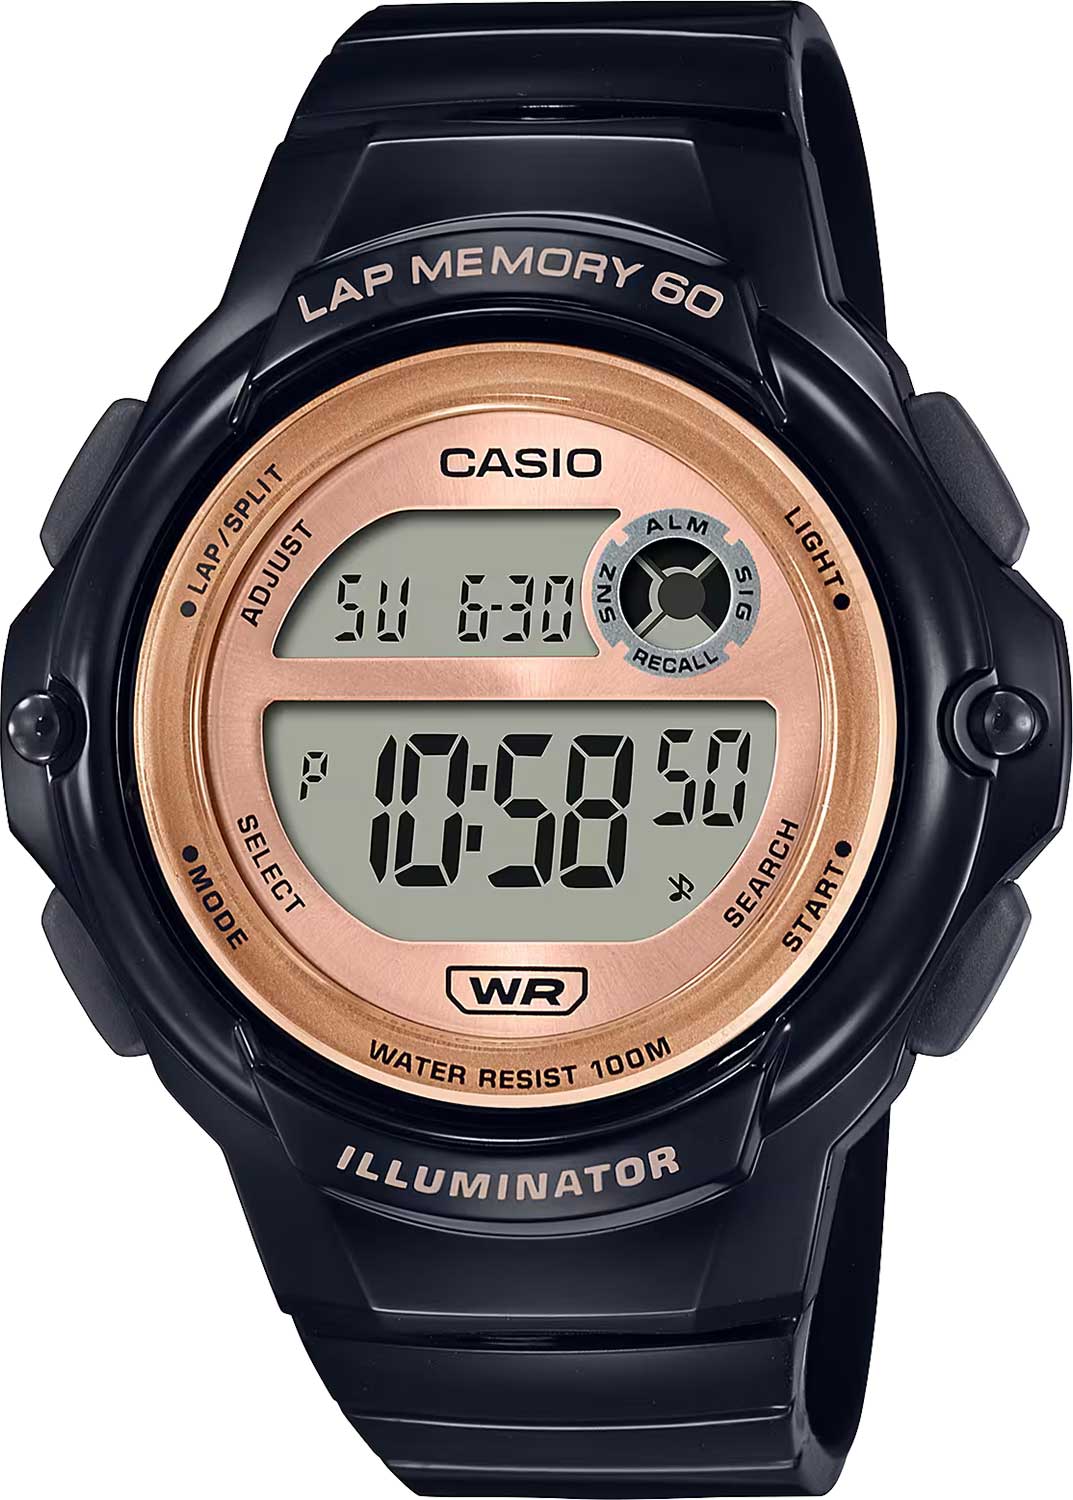    Casio Collection LWS-1200H-1A  